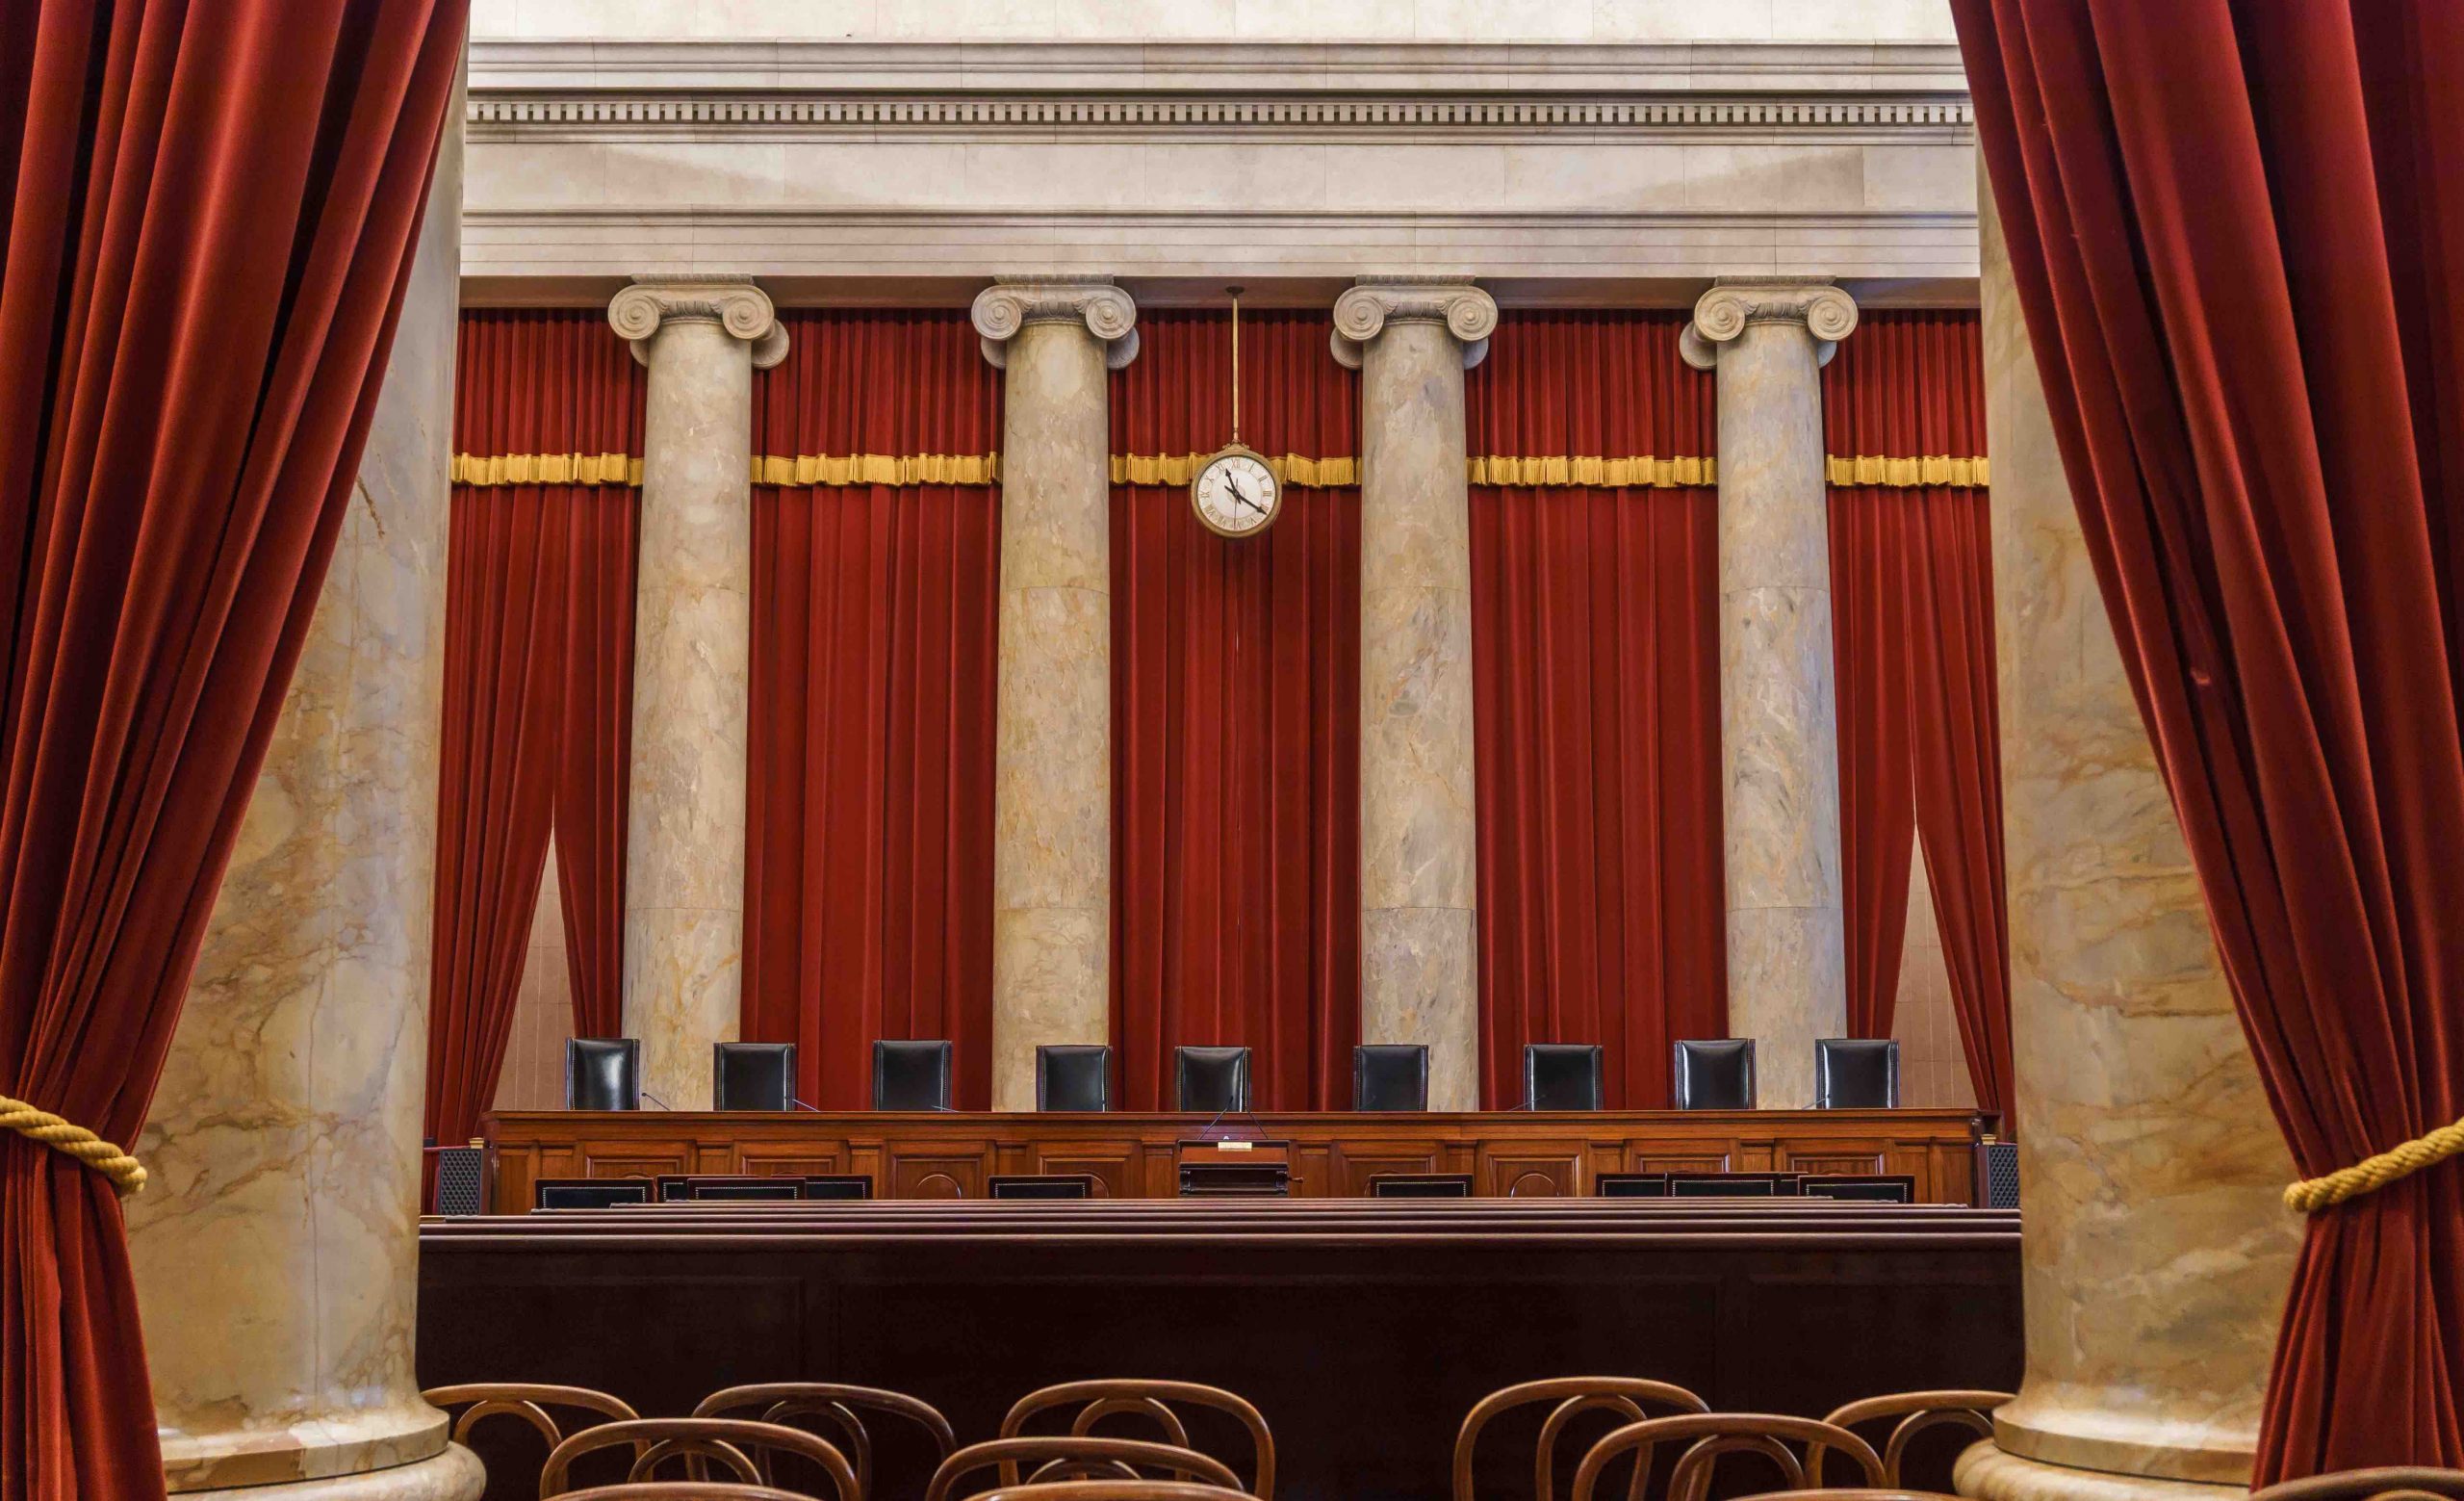 view of empty supreme court bench as seen from back of courtroom